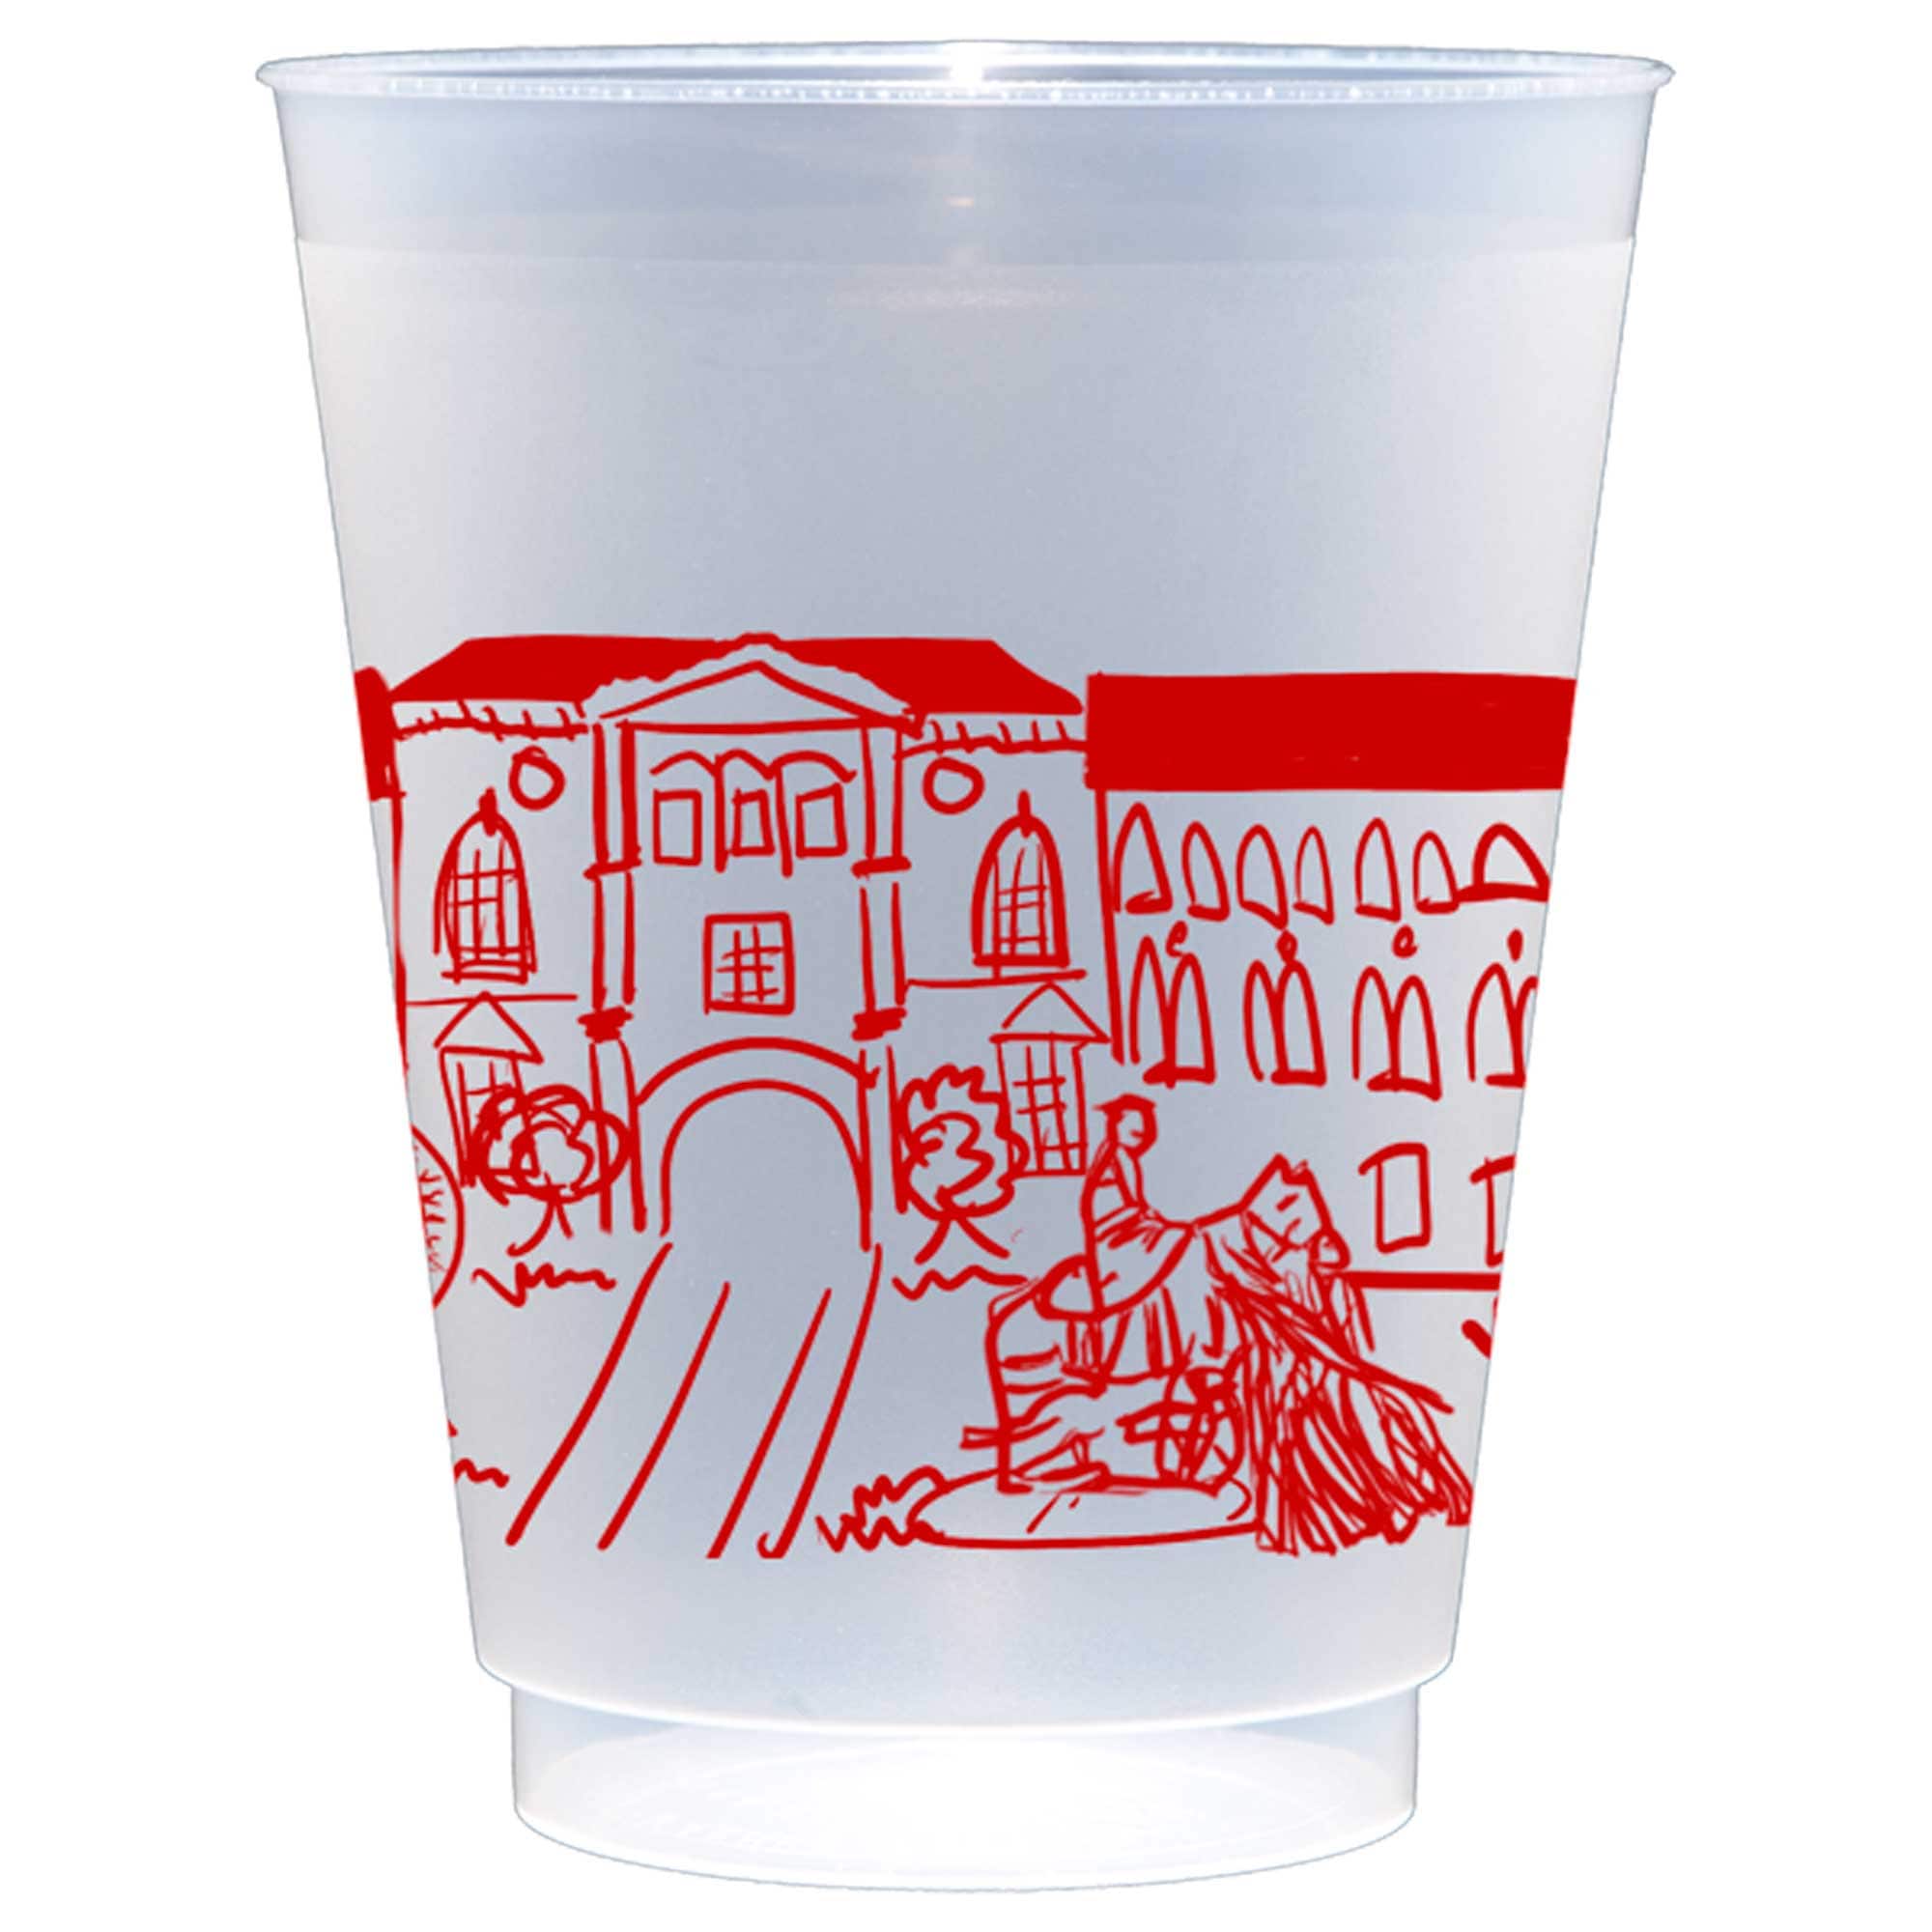 Texas Tech Let's Go Party 2.0 40 oz Pink Tumbler with Straw